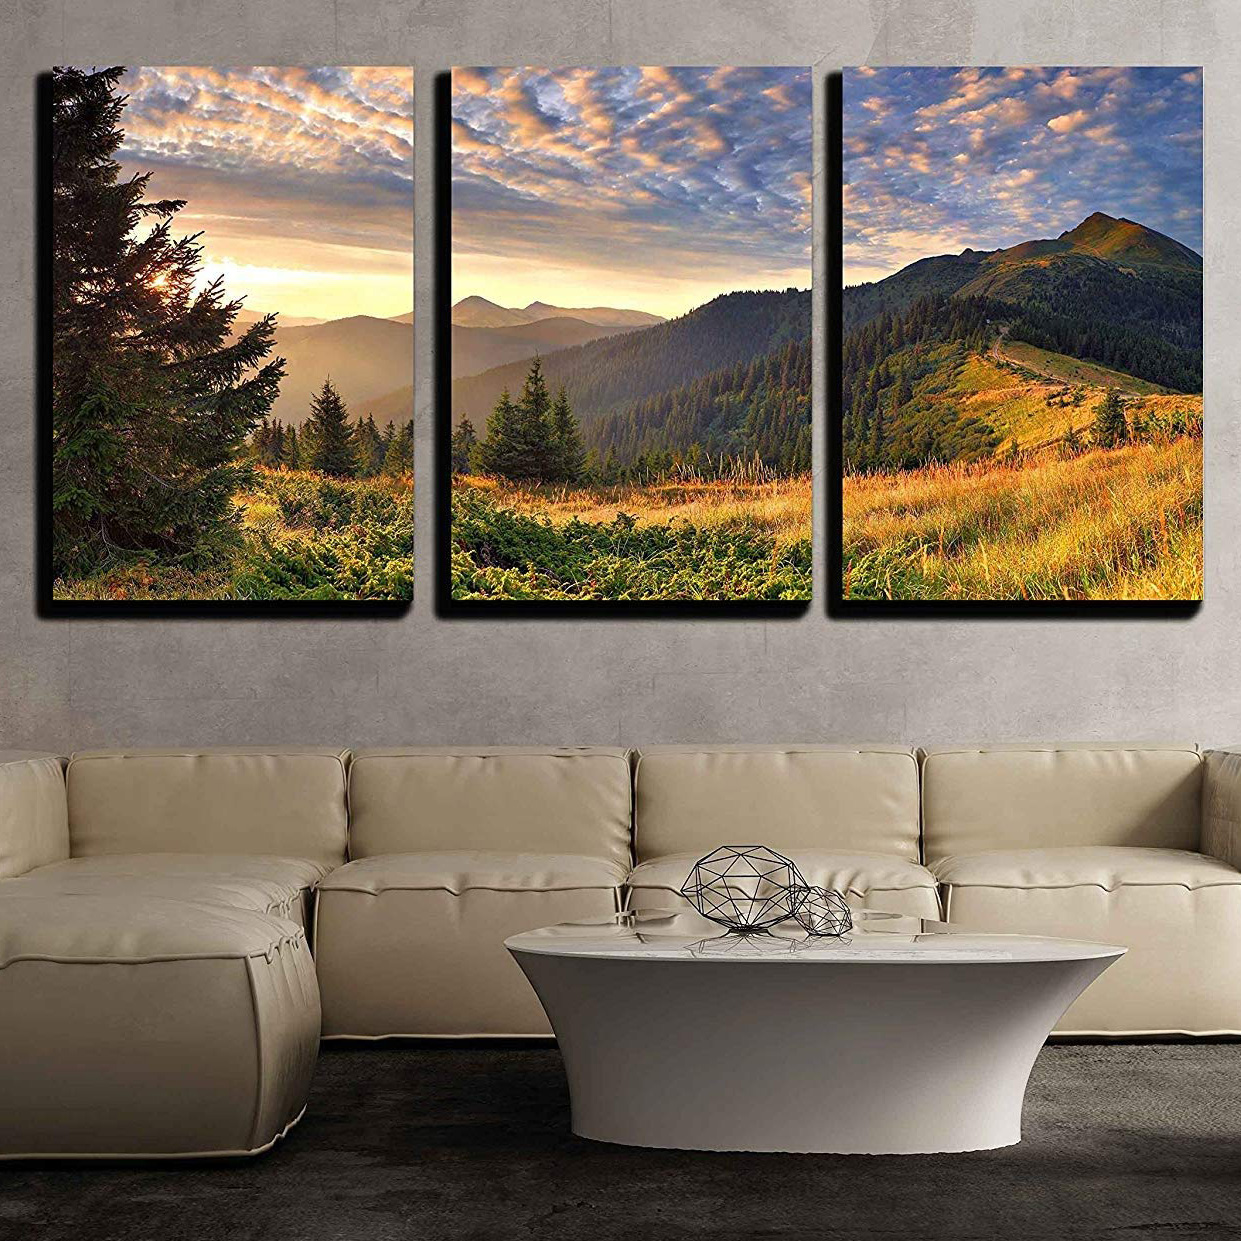 Sunrise in The Mountains - Canvas Art Wall Art - 24